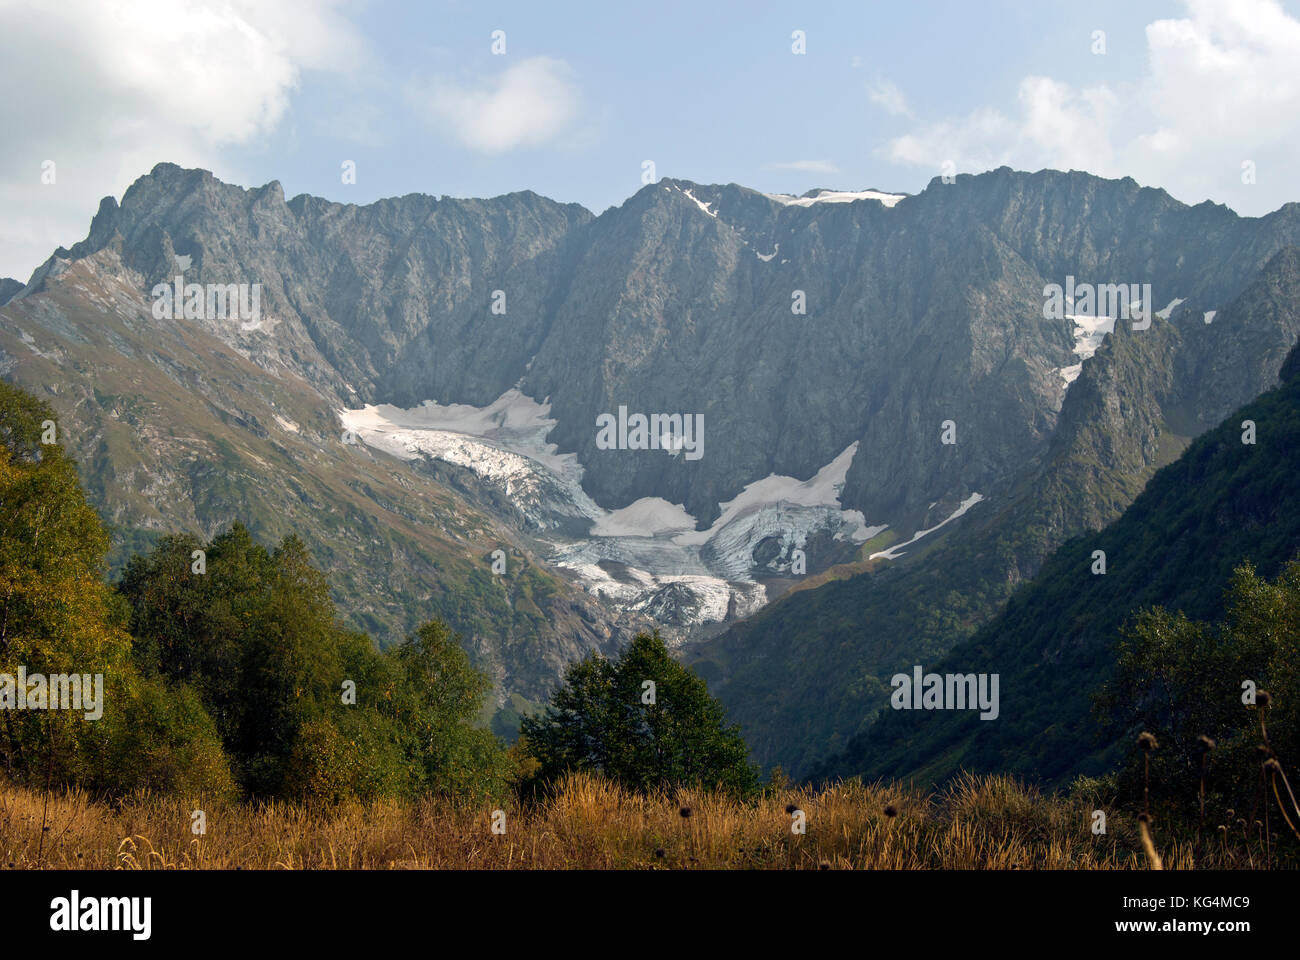 View from the autumn glade on a melting glacier in the Caucasus Mountains. Stock Photo